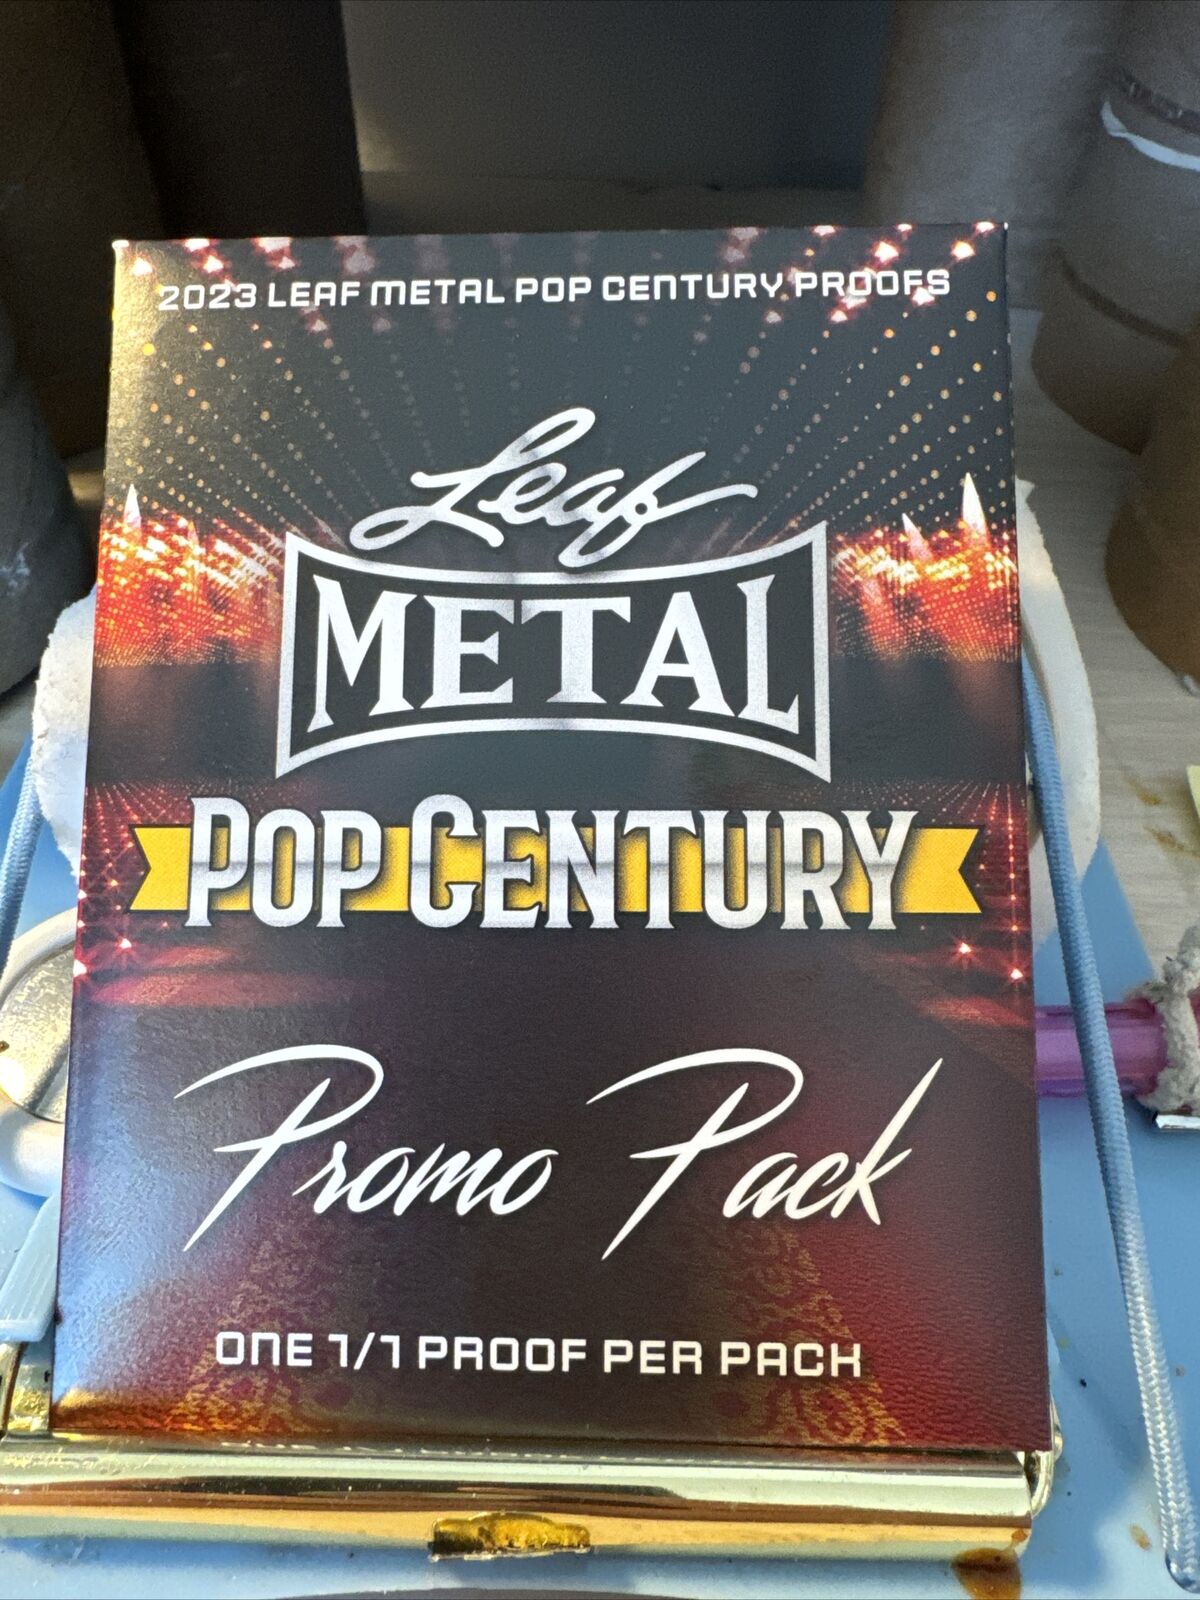 2023 Leaf Metal POP CENTURY 1/1 Proof Promo Pack Sealed New - You buy, You open